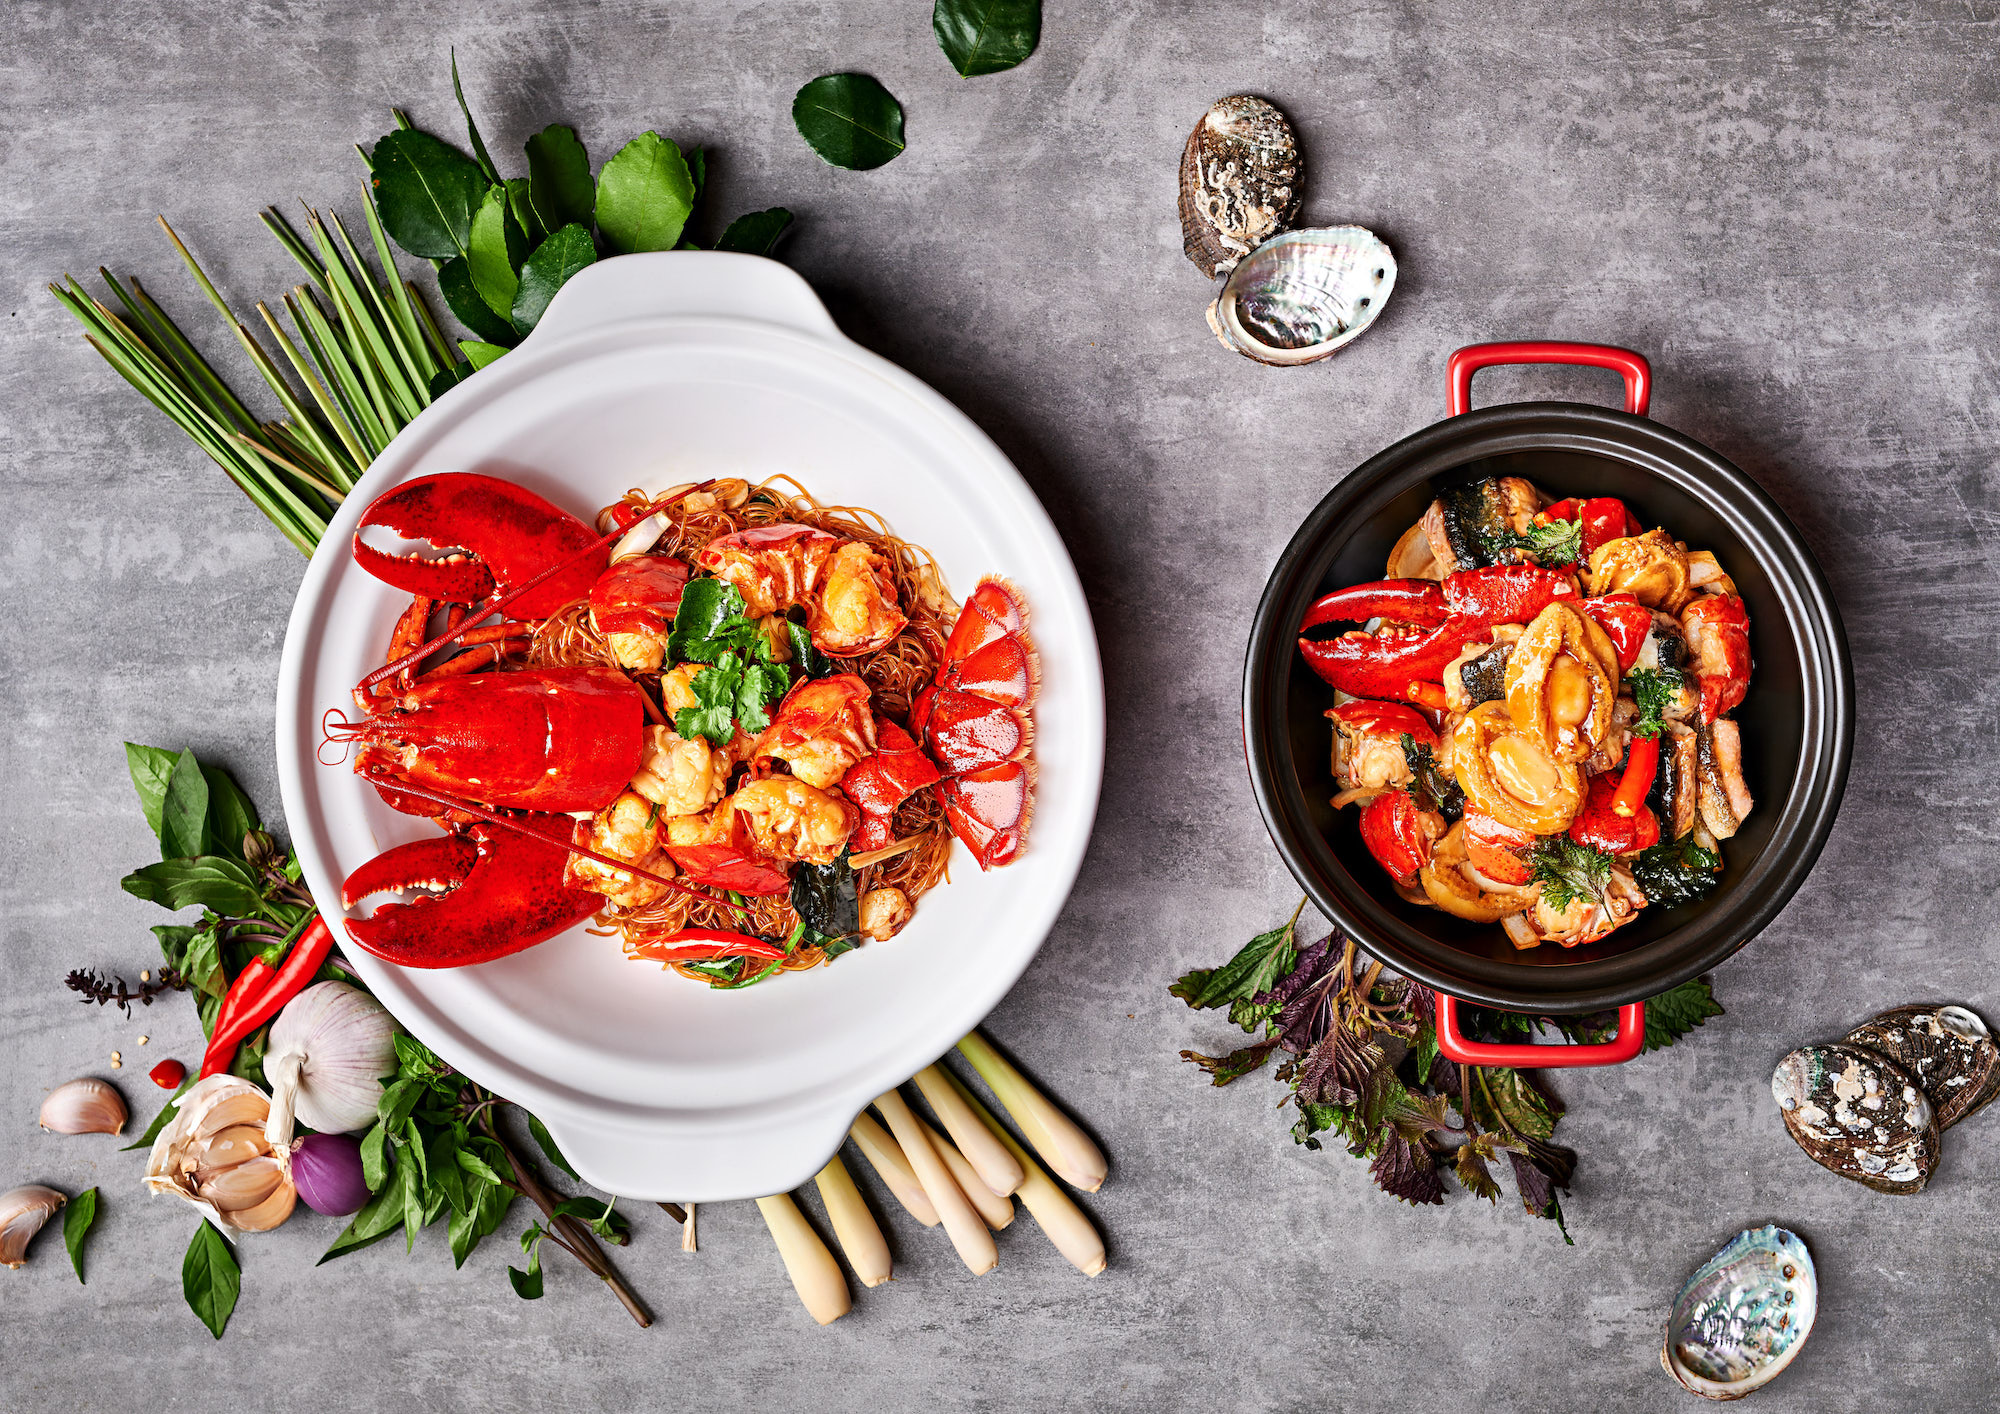 Golden Pavilion_Stir-fried Boston Lobster with Fresh Basil and Glass Noodles (top), Vietnamese Style Stir-fried Abalone and Lobster city of dreams macau